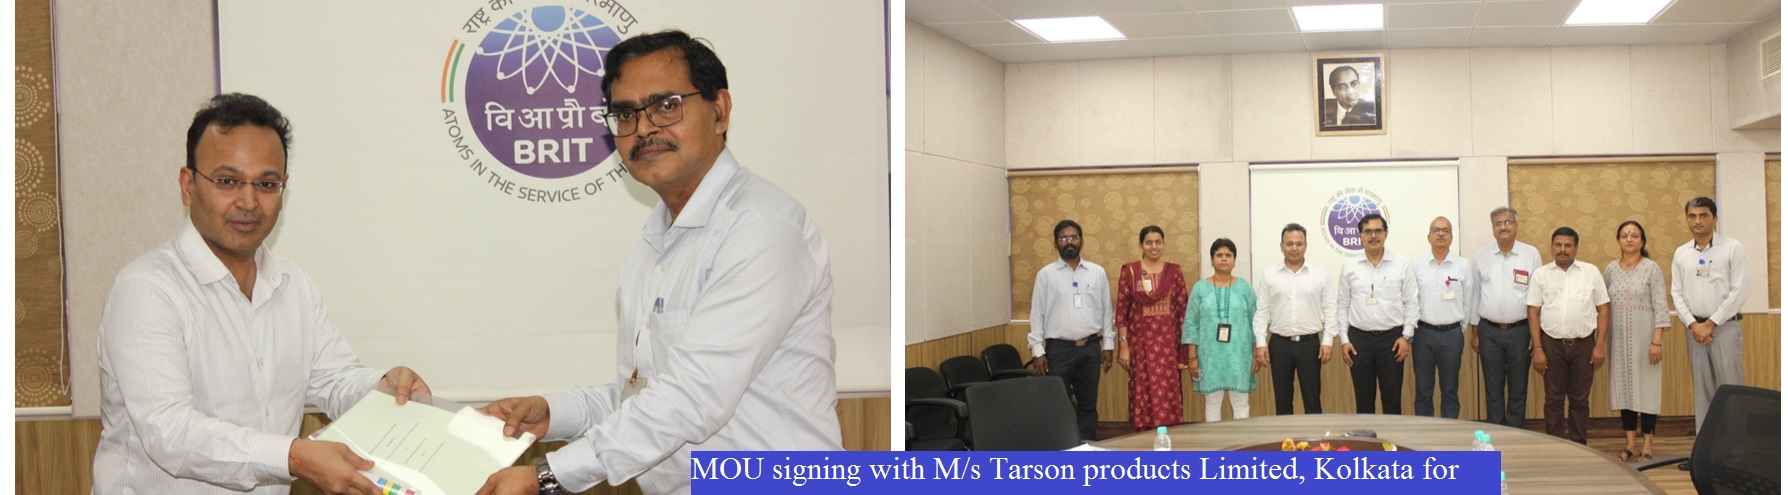 MOU signing with  Tarson products Limited, Kolkata for RPP.